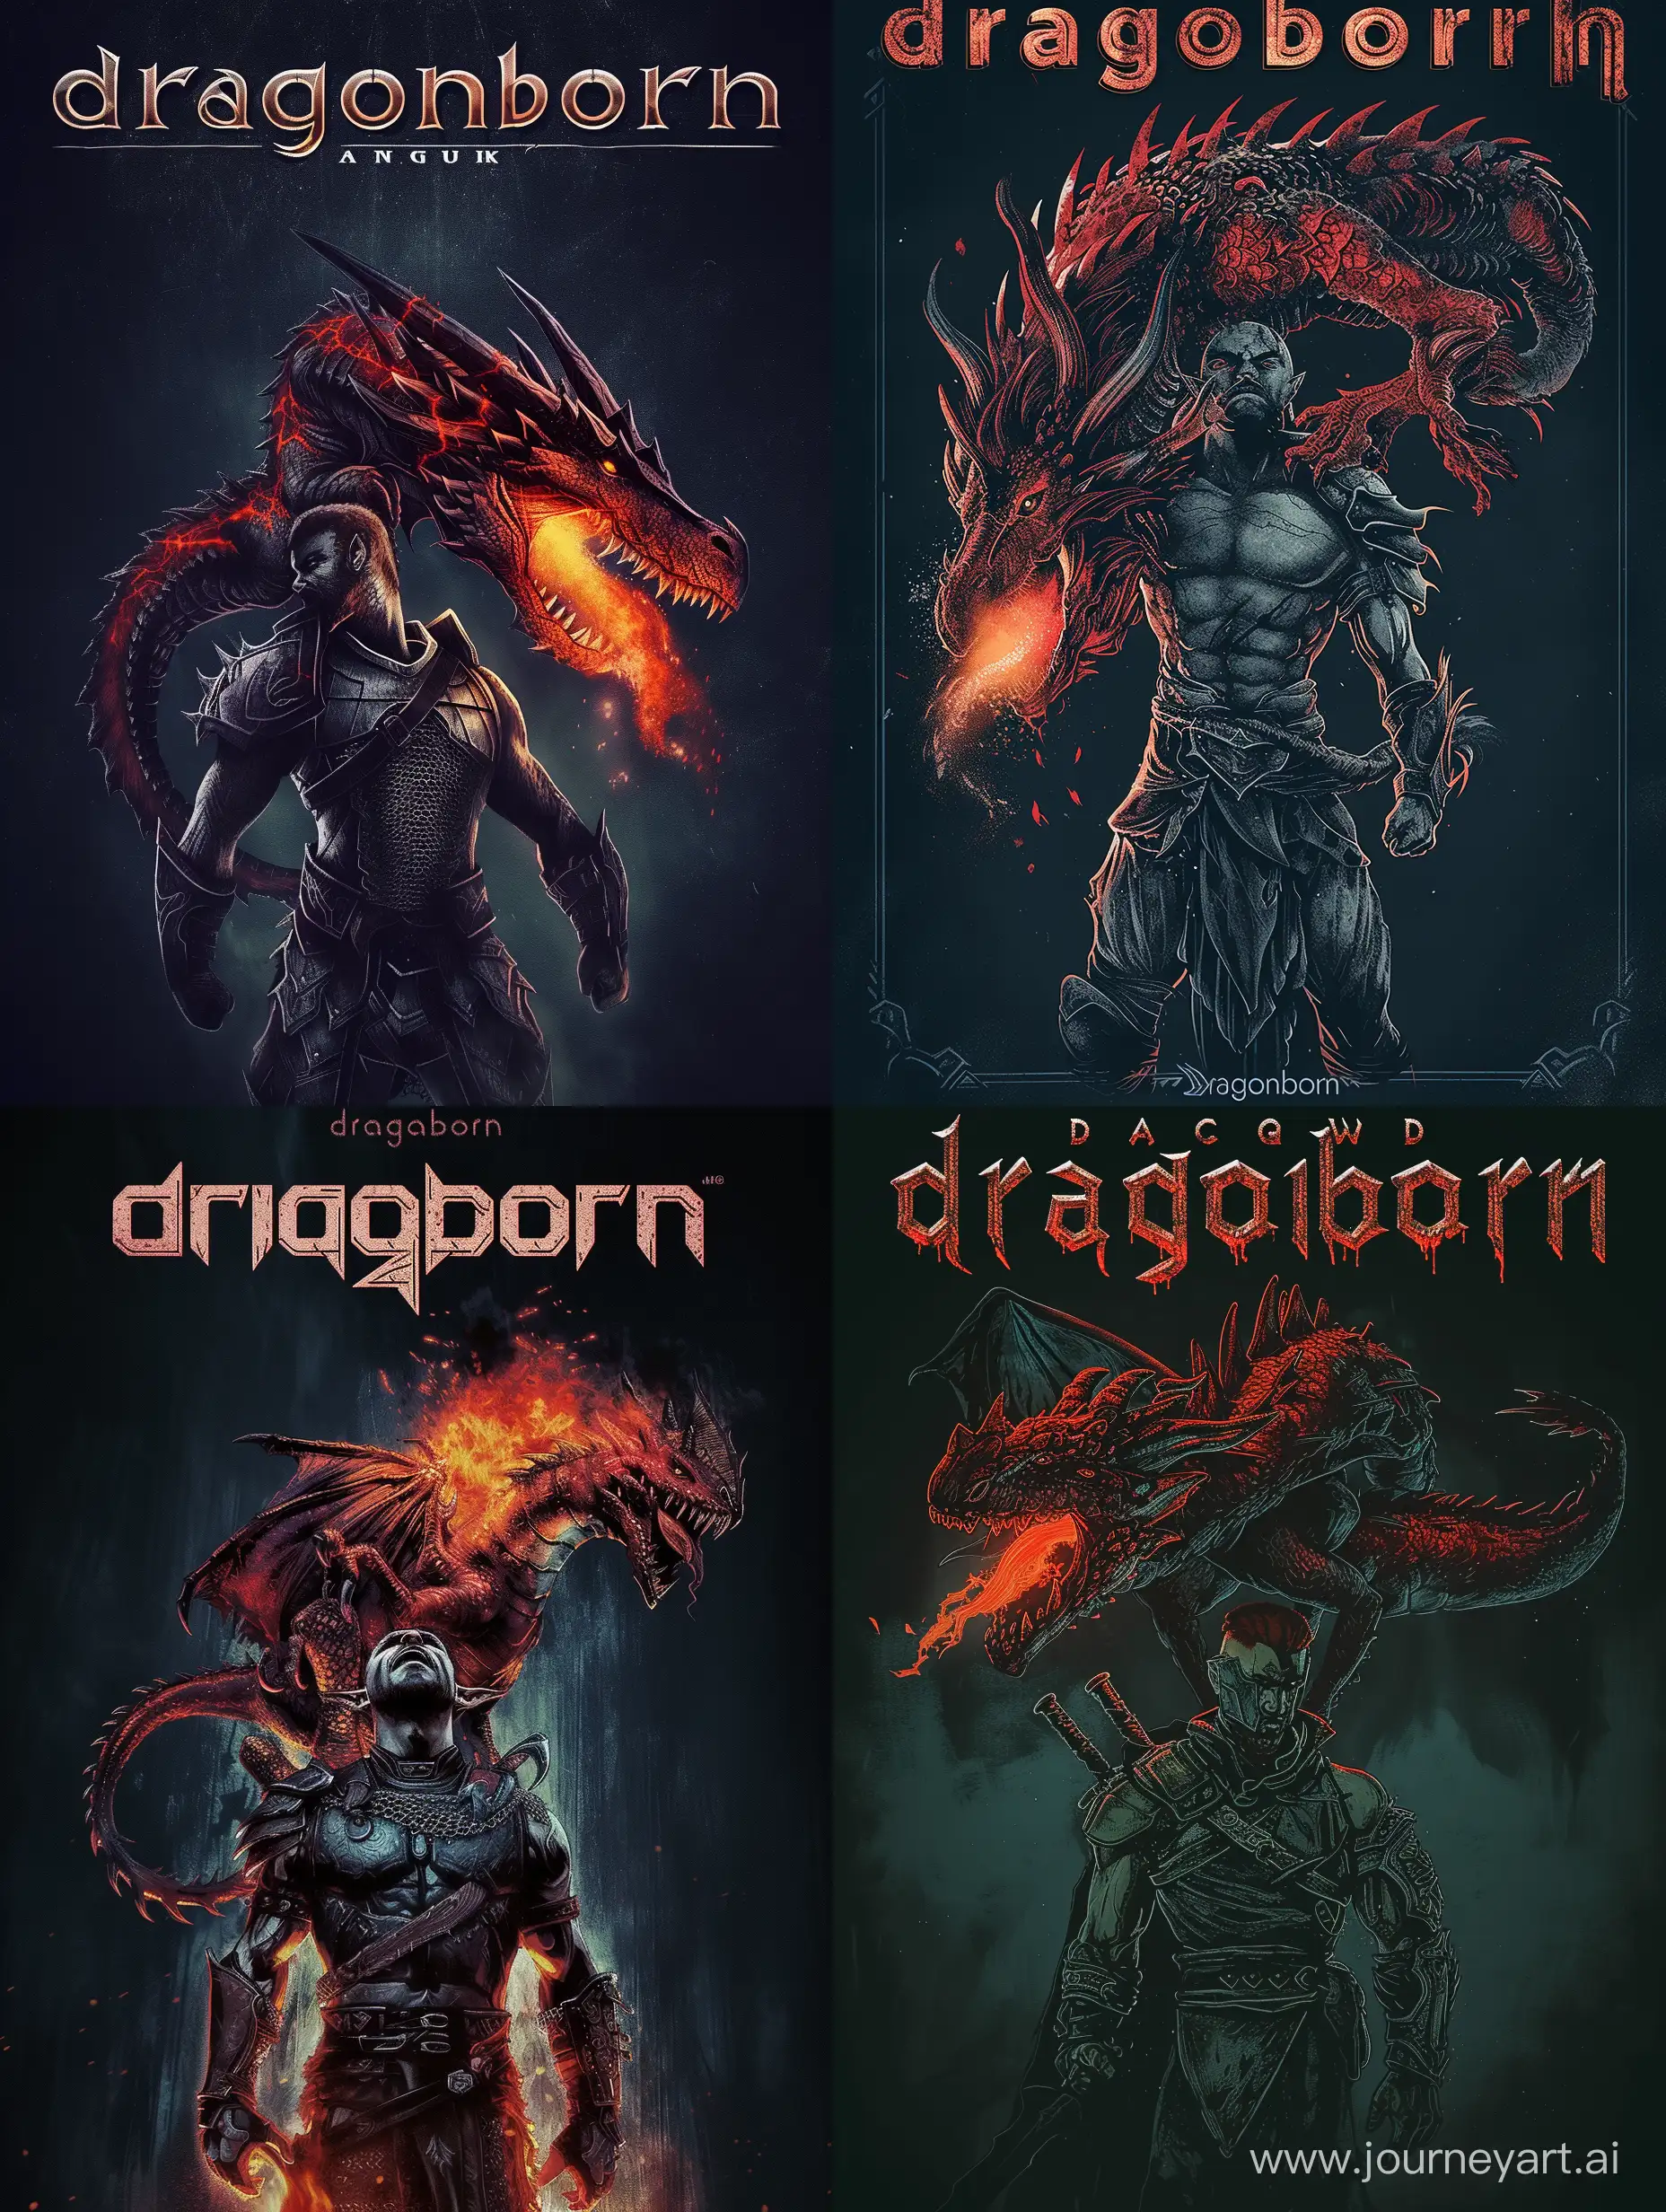 A picture in dark colors for a group called dragonborn (from the game skyrim). In the picture, a dragonborn with a red and black dragon on his back, who breathes fire. At the top, “dragonborn” is written in large letters in a skyrim-style font